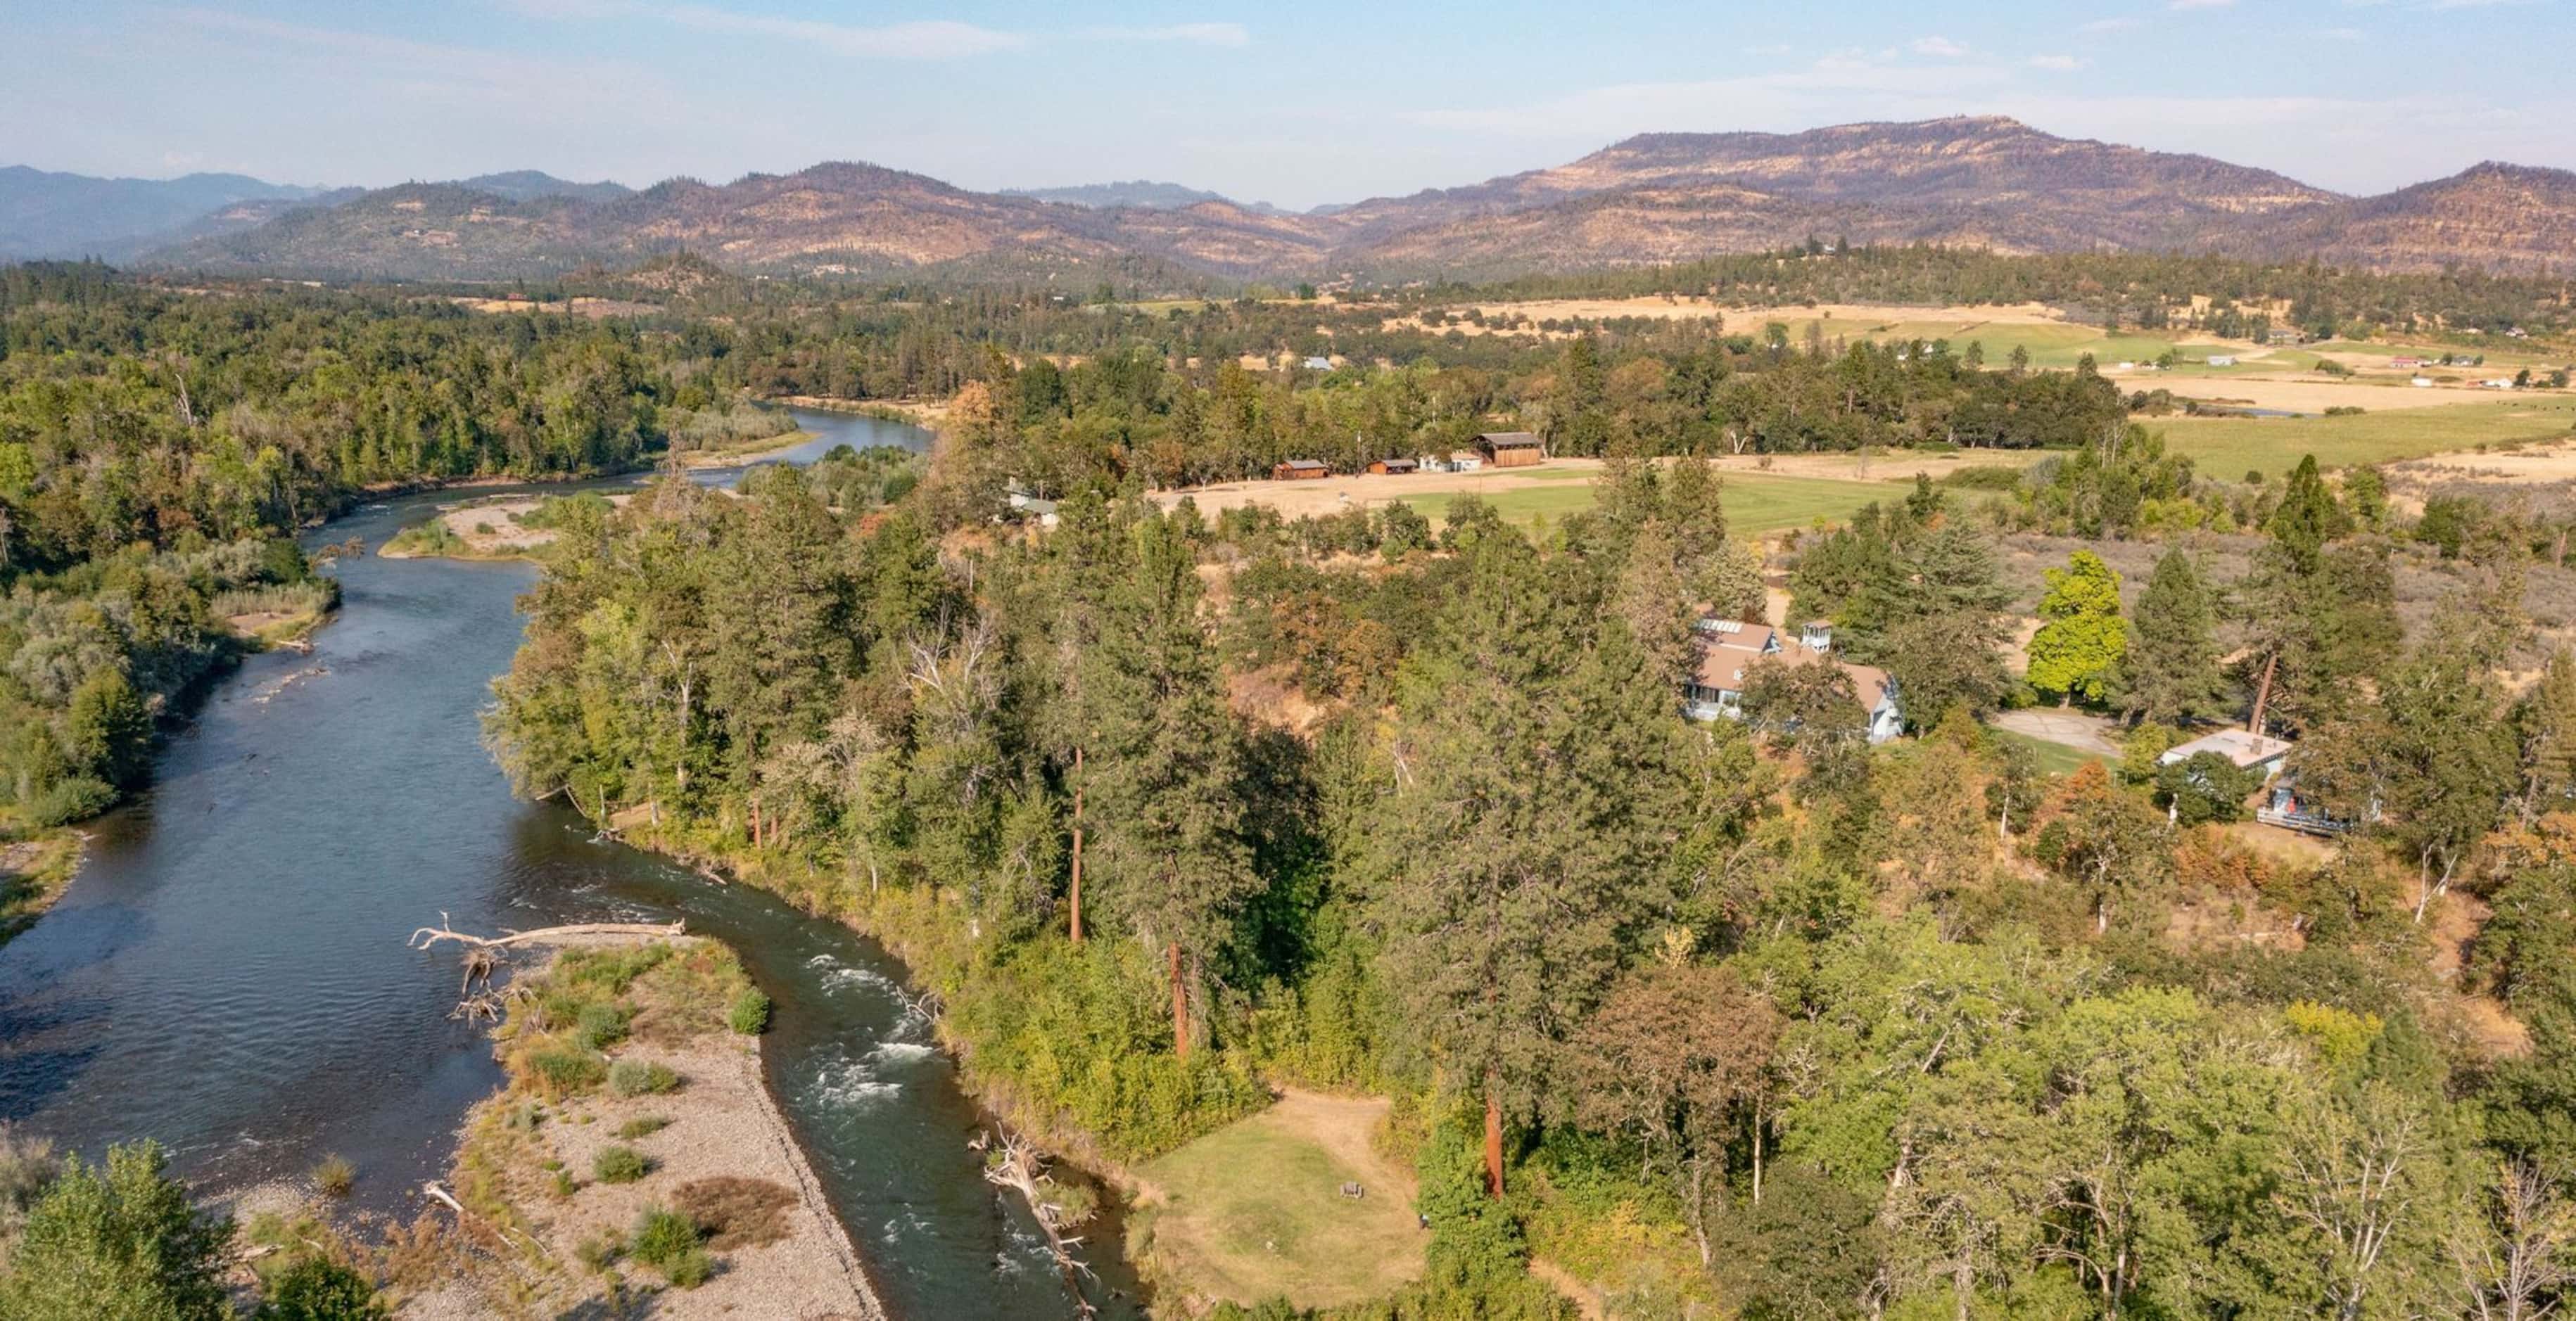 Patrick Duffy's ranch includes two miles of river frontage with steelhead trout and salmon,...